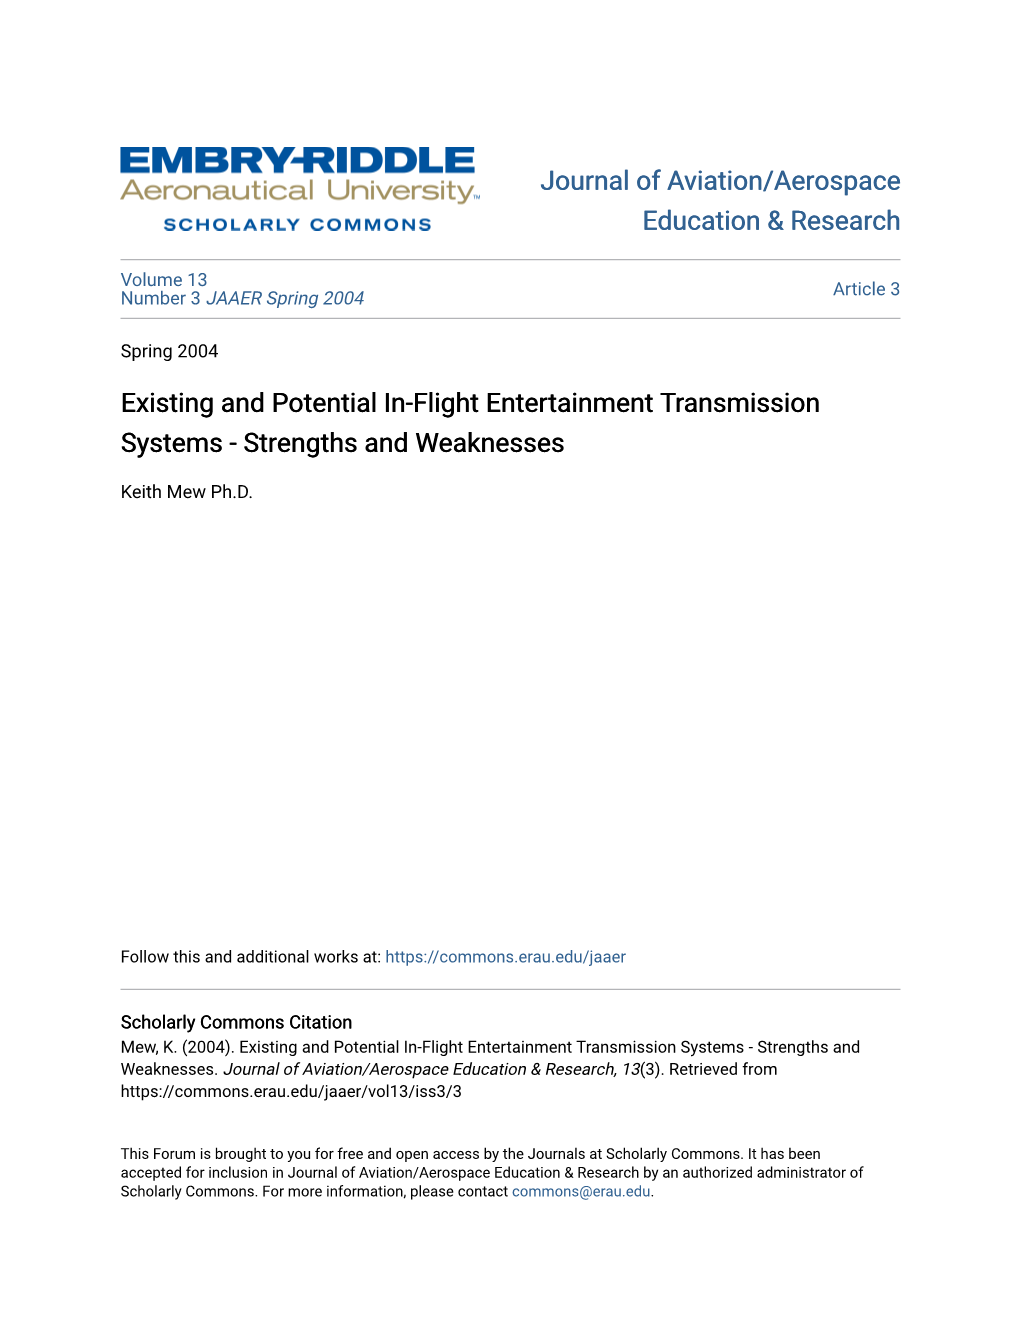 Existing and Potential In-Flight Entertainment Transmission Systems - Strengths and Weaknesses